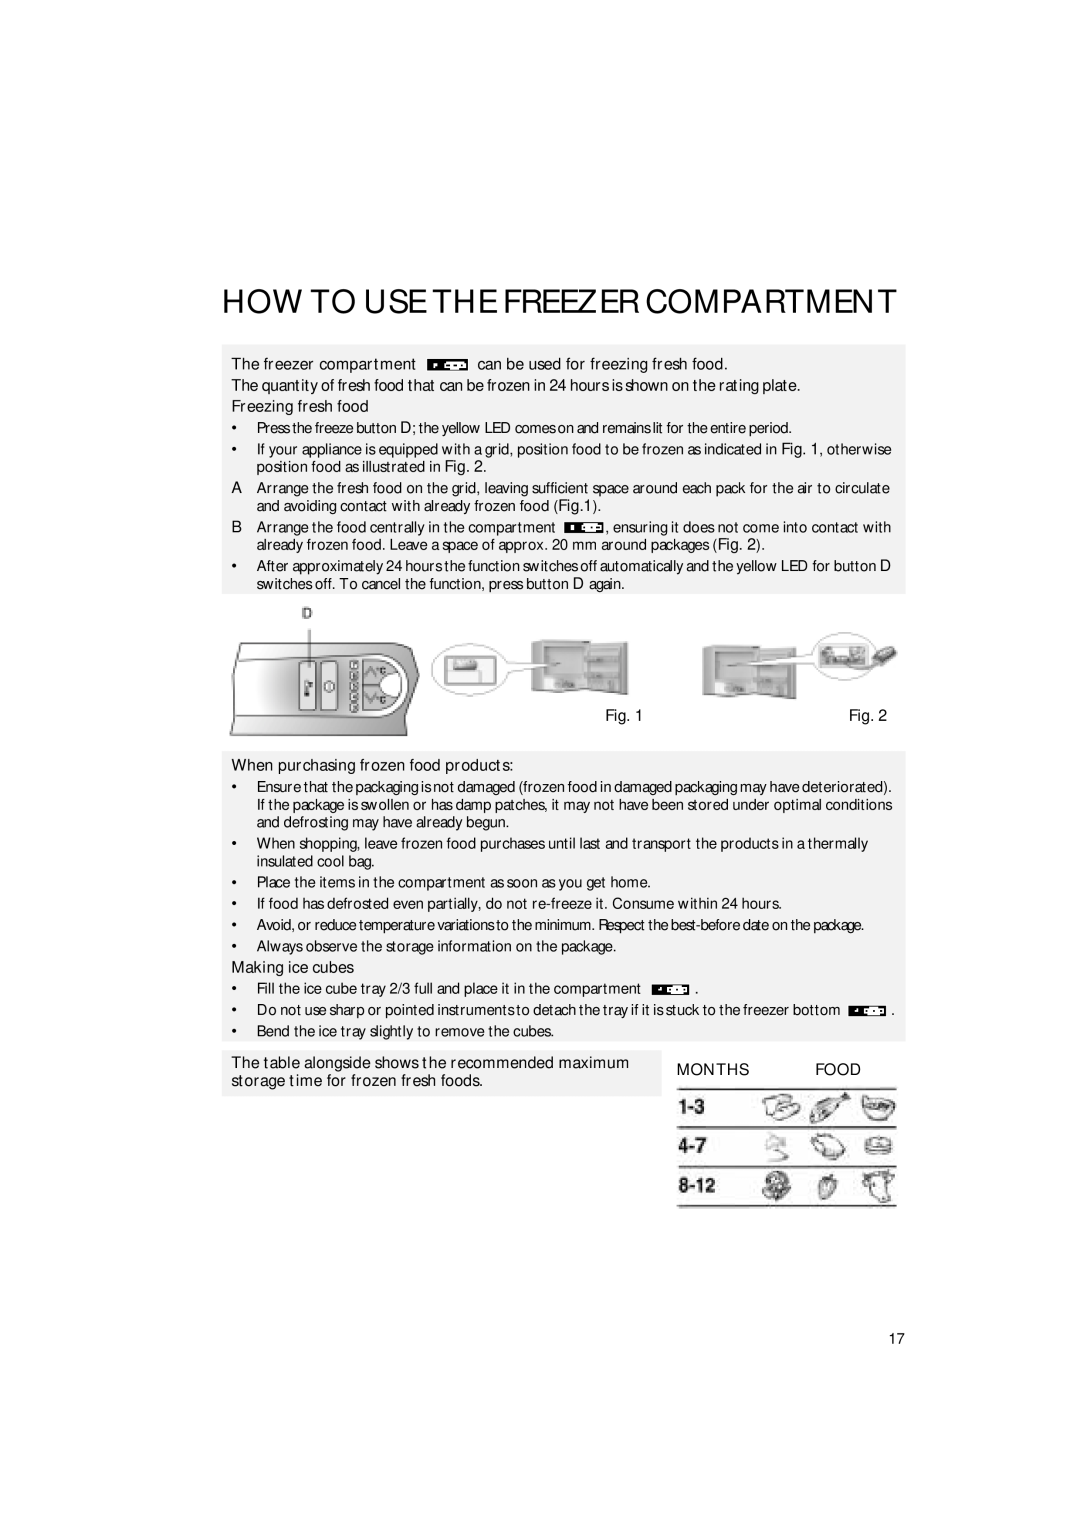 Smeg FR310APL How To Use The Freezer Compartment, The freezer compartment can be used for freezing fresh food, Months 